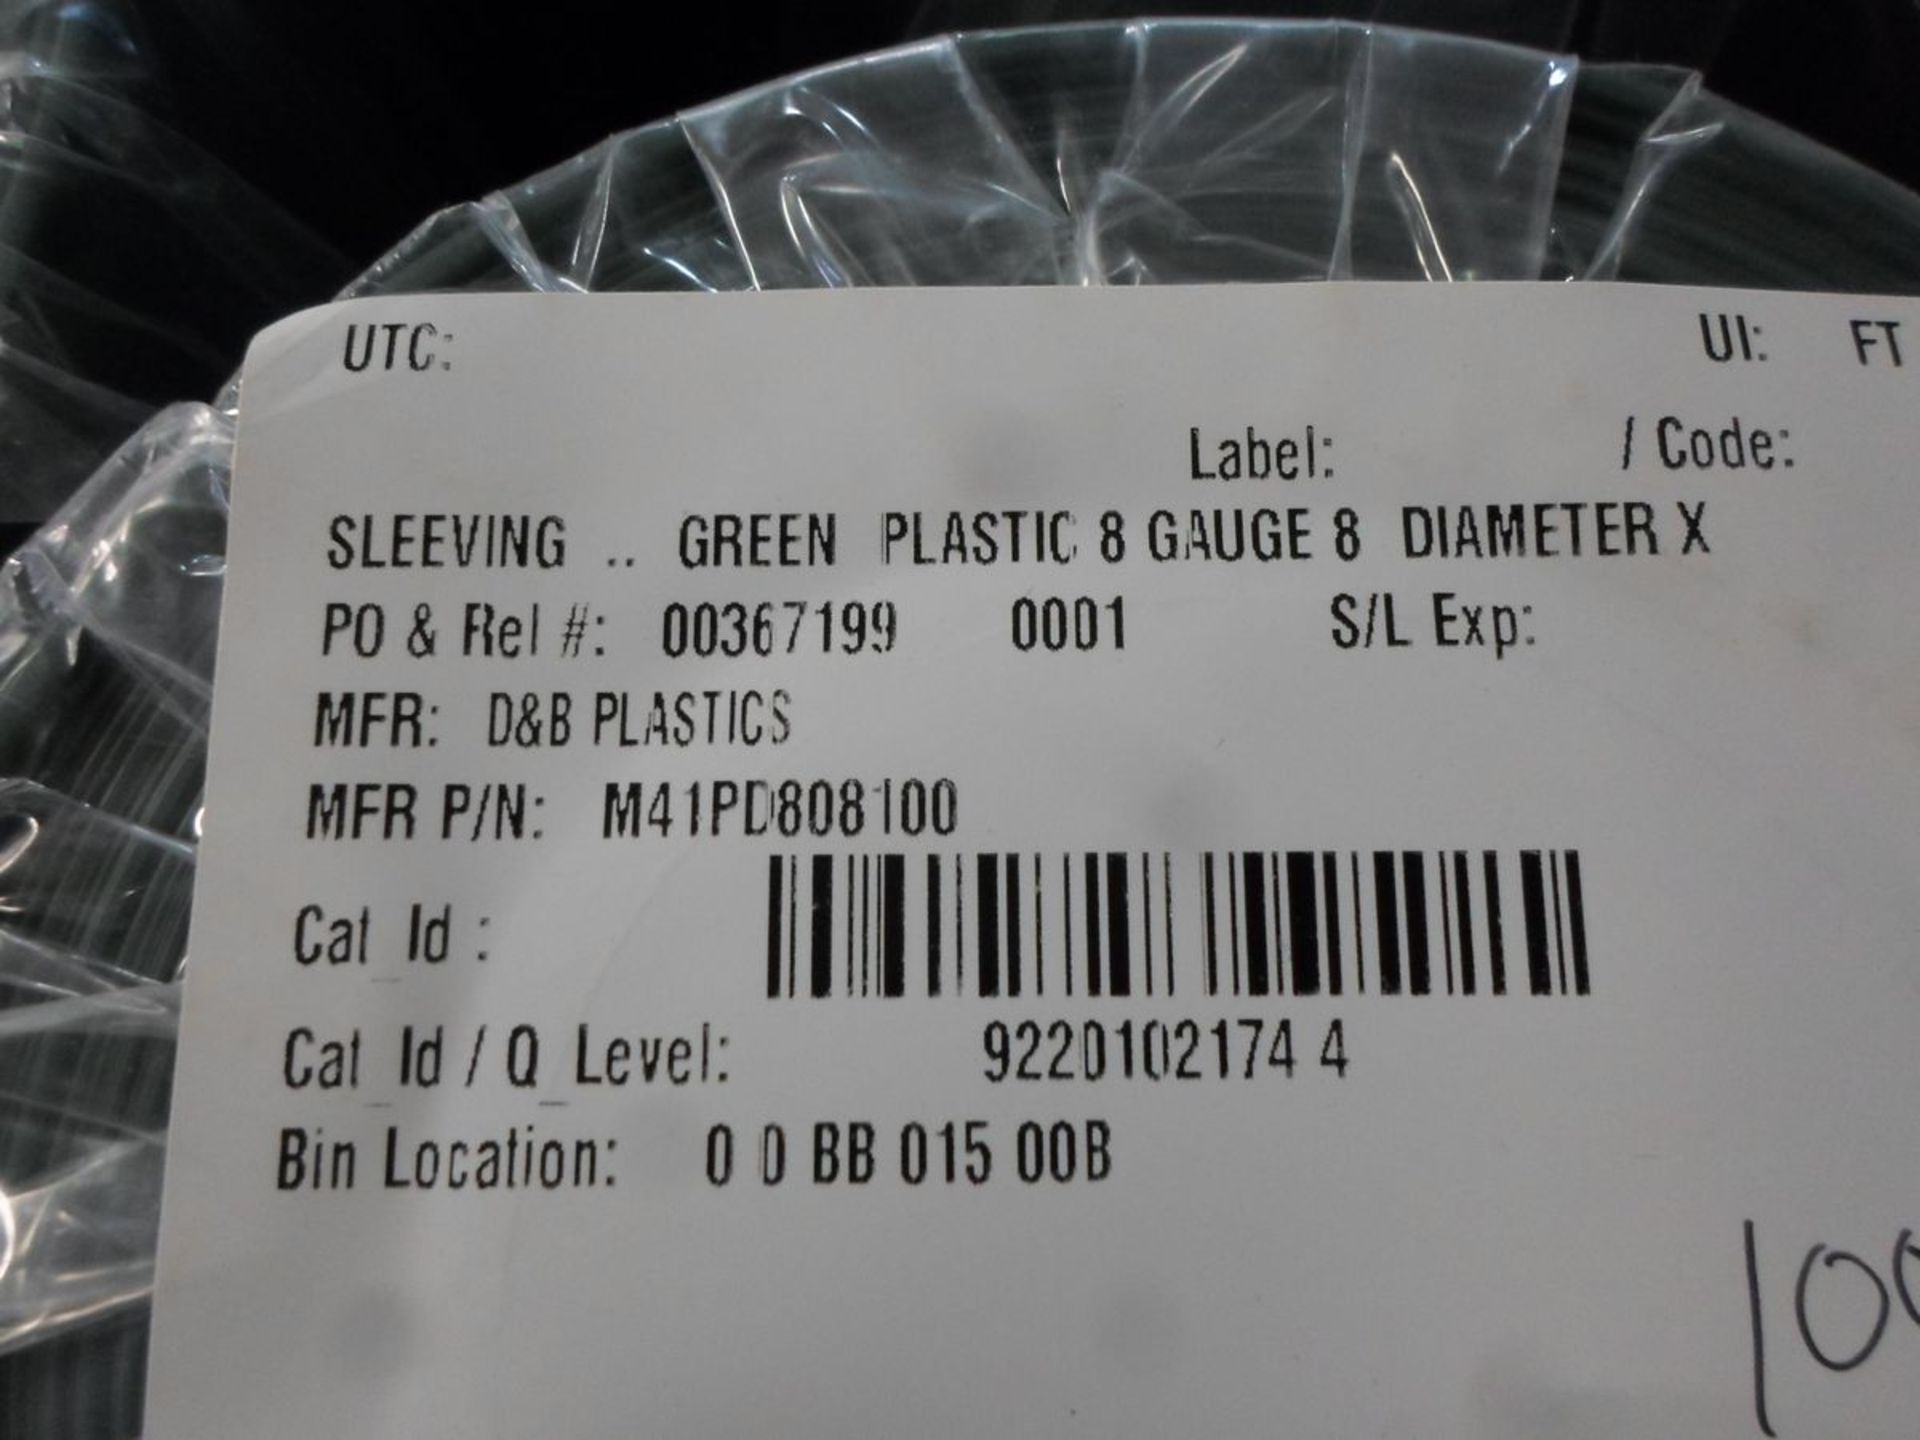 LOT OF THREE NEW BOXES D&B PLASTICS GREEN PASTIC 8 GUAGE SLEEVING 8 DIAMETER 4 IN EACH BOX - Image 2 of 4